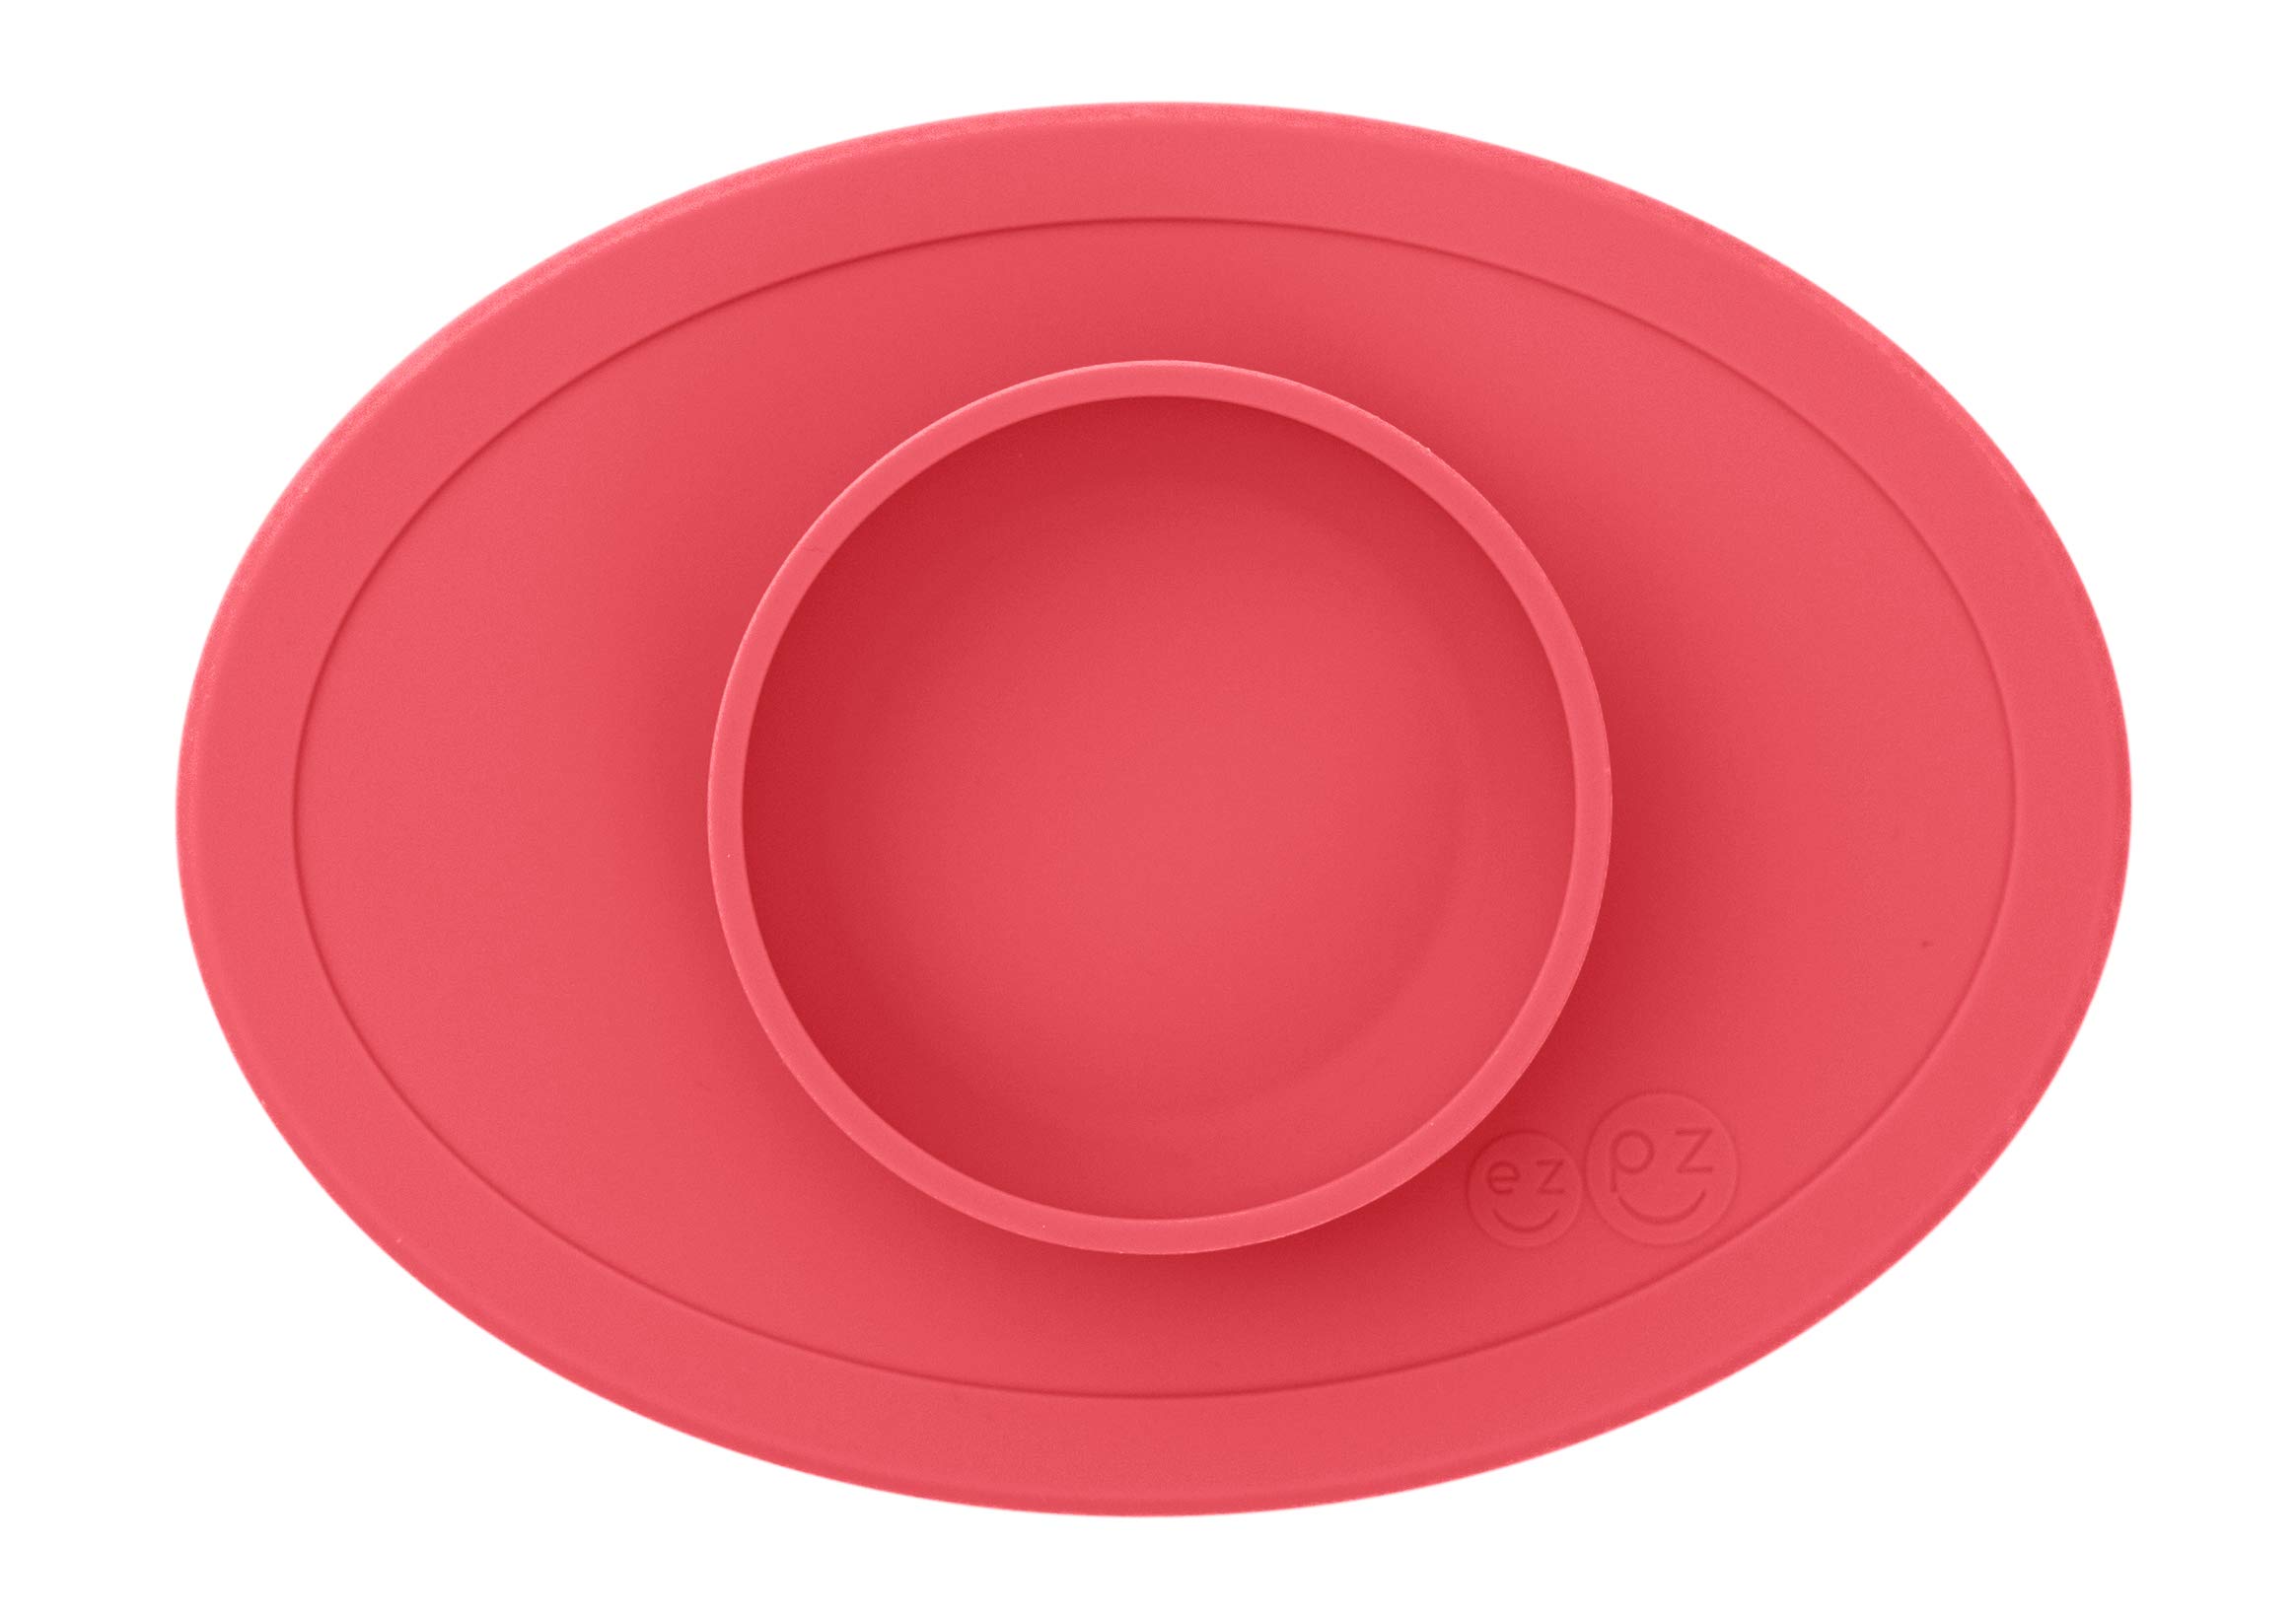 ezpz Tiny Collection Set (Coral) - 100% Silicone Cup, Spoon & Bowl with Built-in Placemat for First Foods + Baby Led Weaning + Purees - Designed by a Pediatric Feeding Specialist - 6 Months+